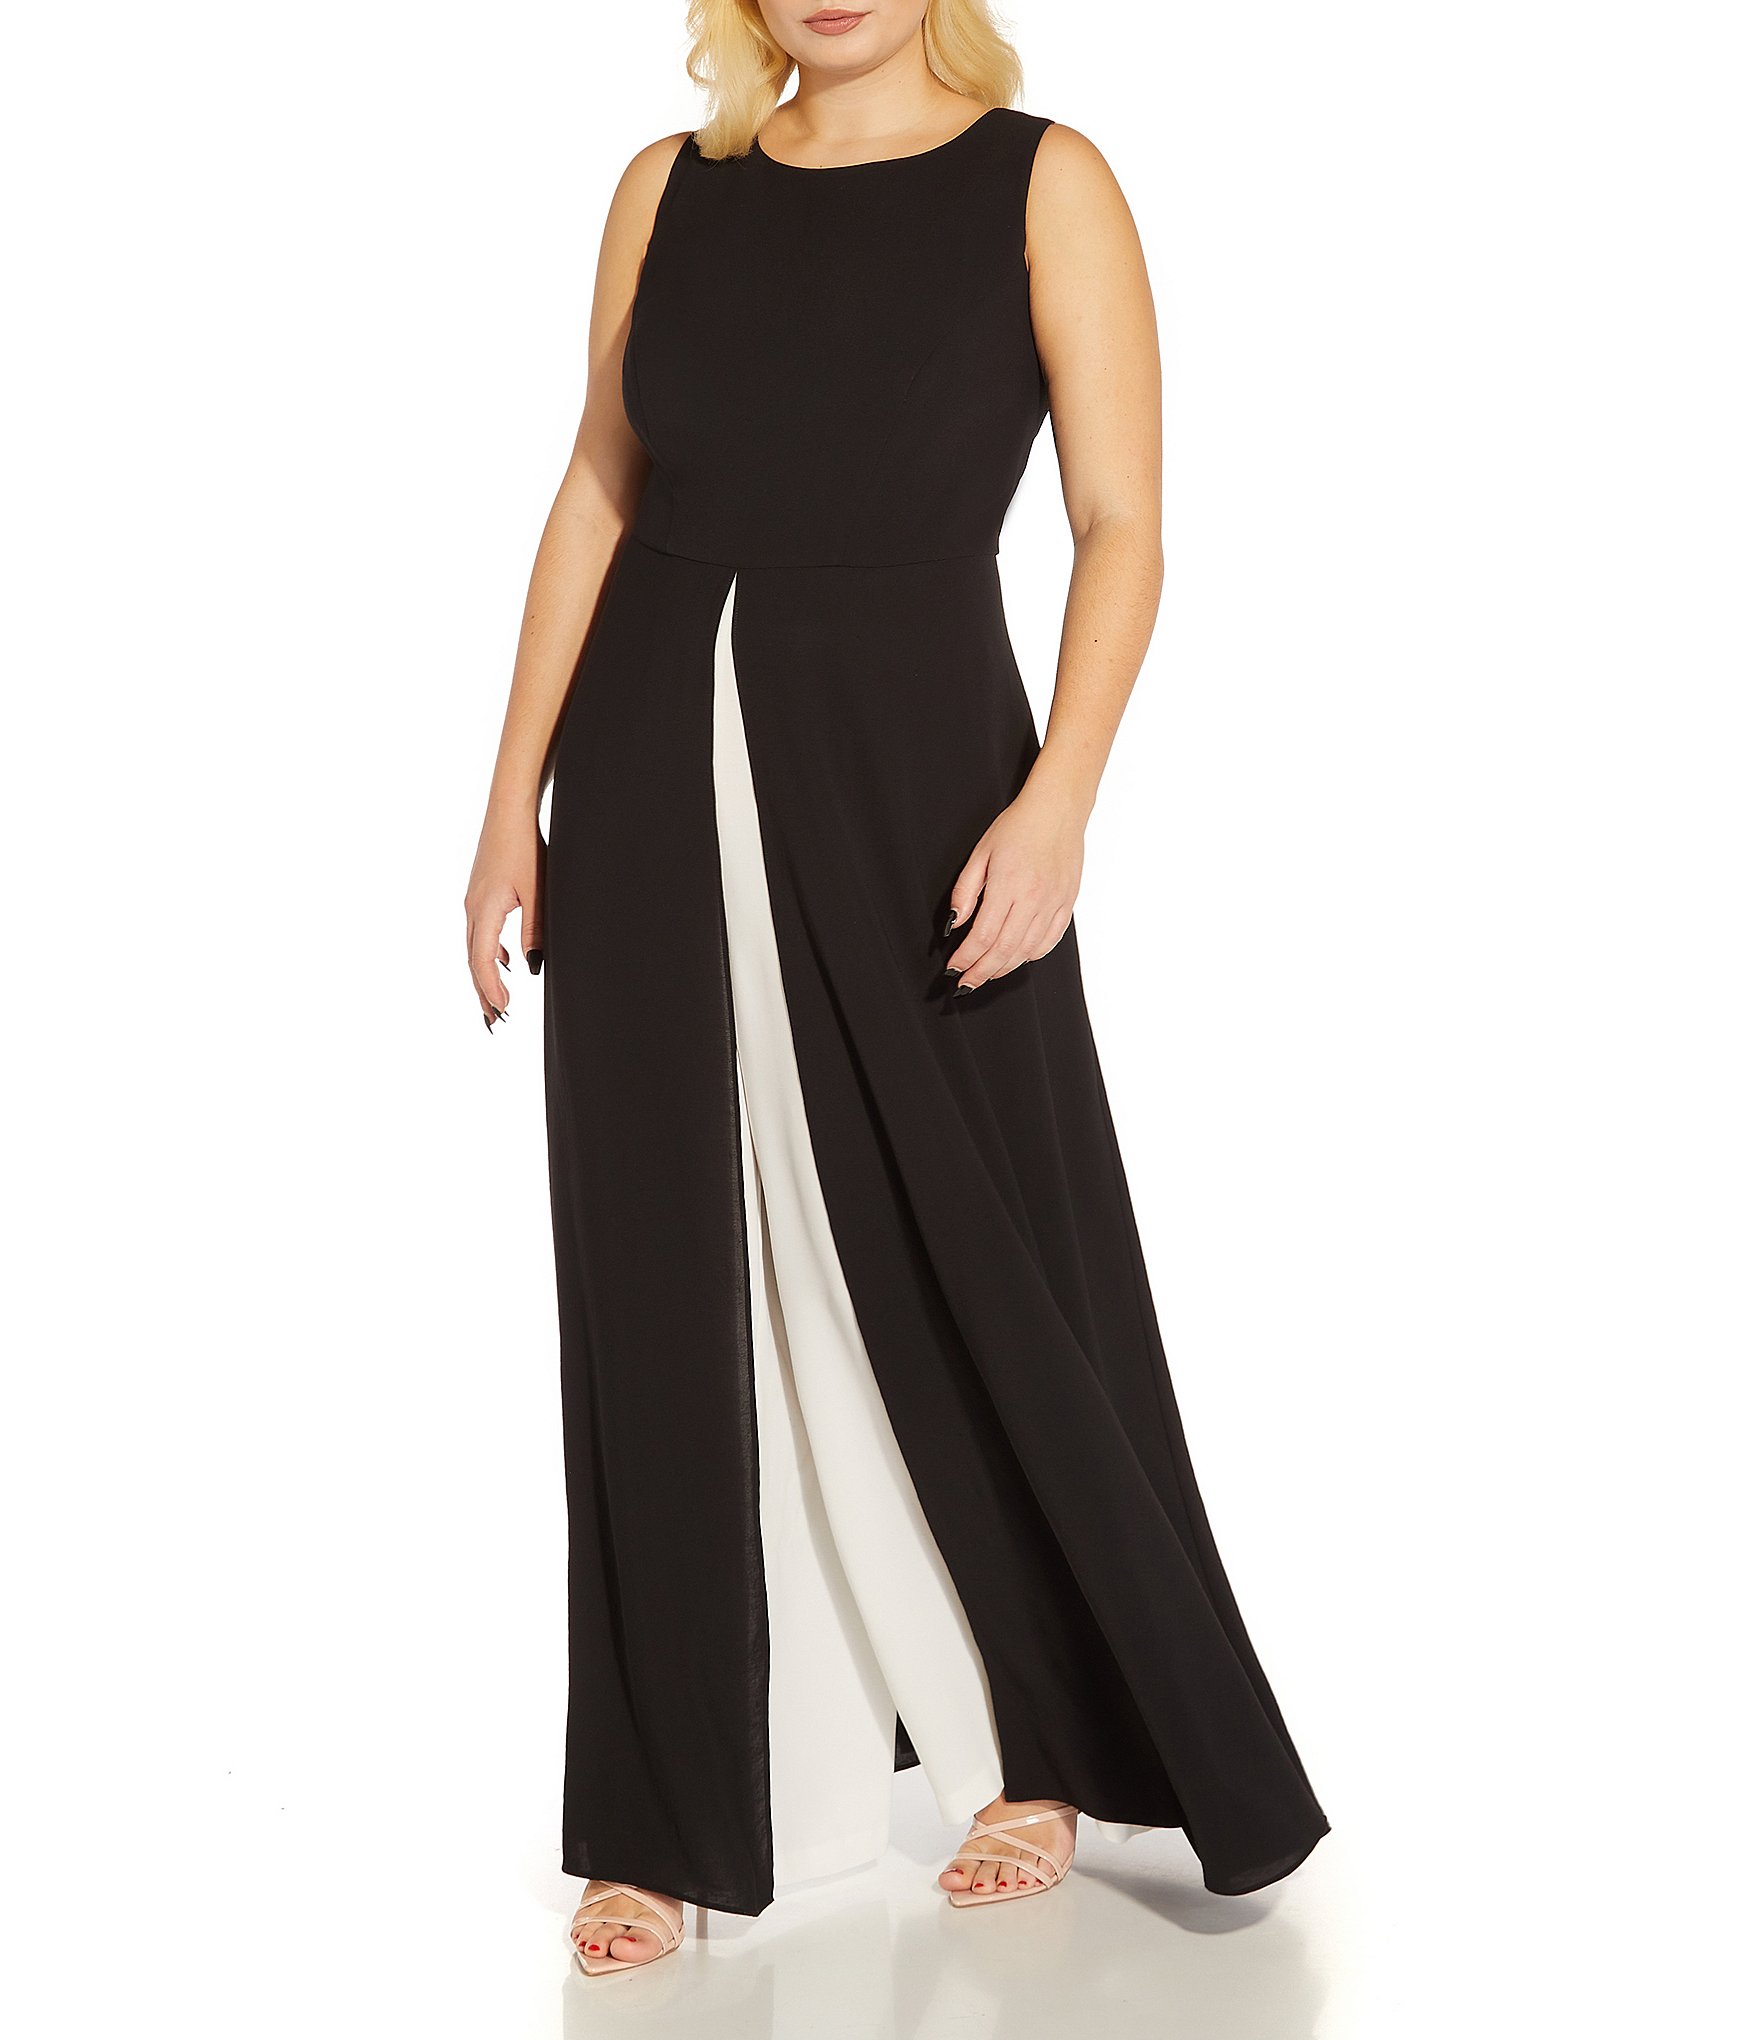 Black Adrianna Papell AP1E201490 Sleeveless Formal Pant Suit for $219.99 –  The Dress Outlet